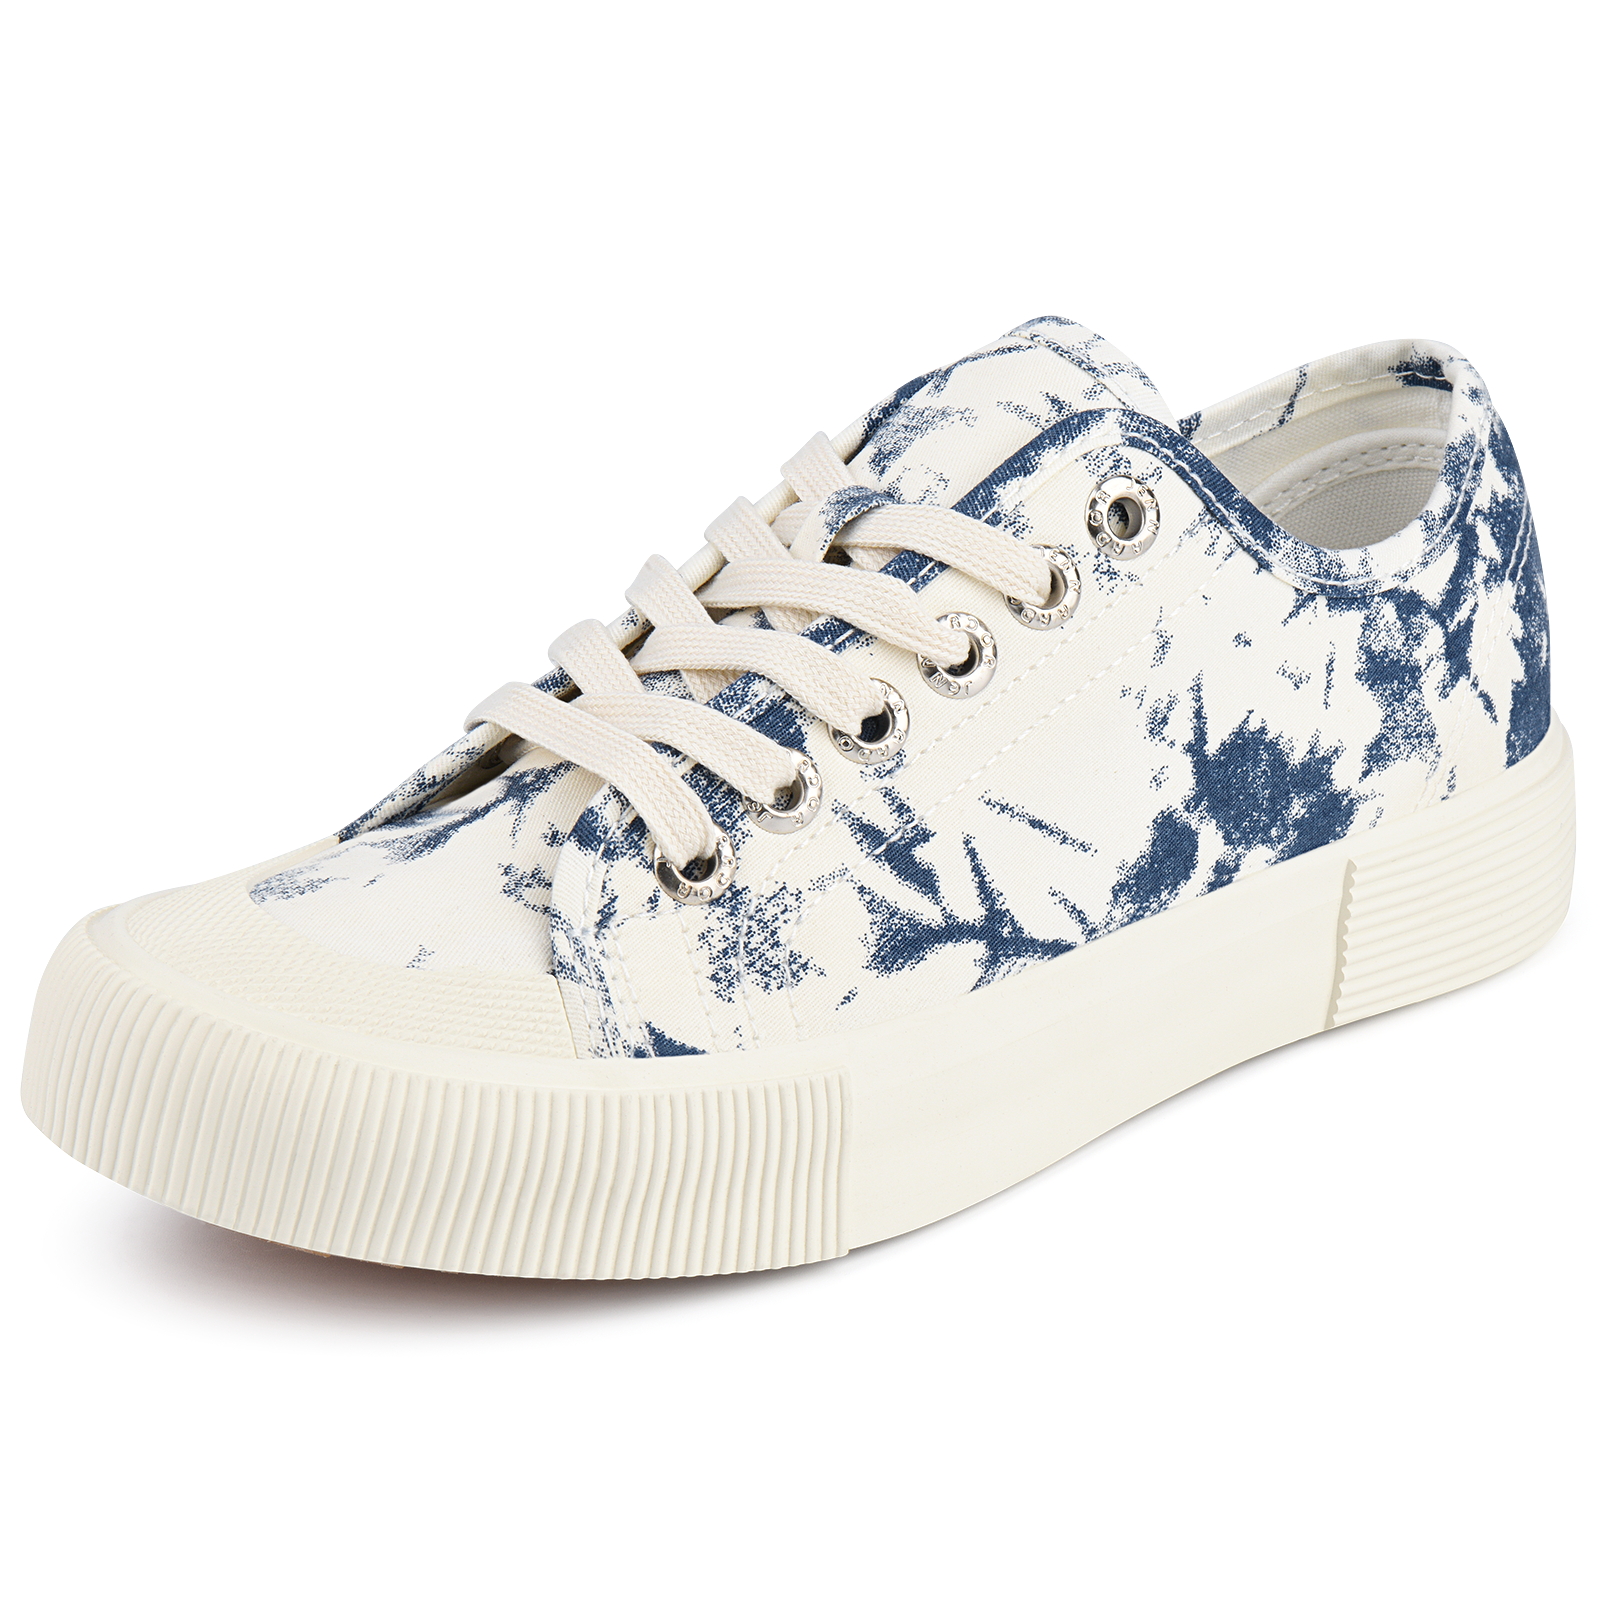 JENN ARDOR Womens Canvas Shoes Low Tops Lace up Fashion Sneakers for Walking Tennis - image 3 of 8